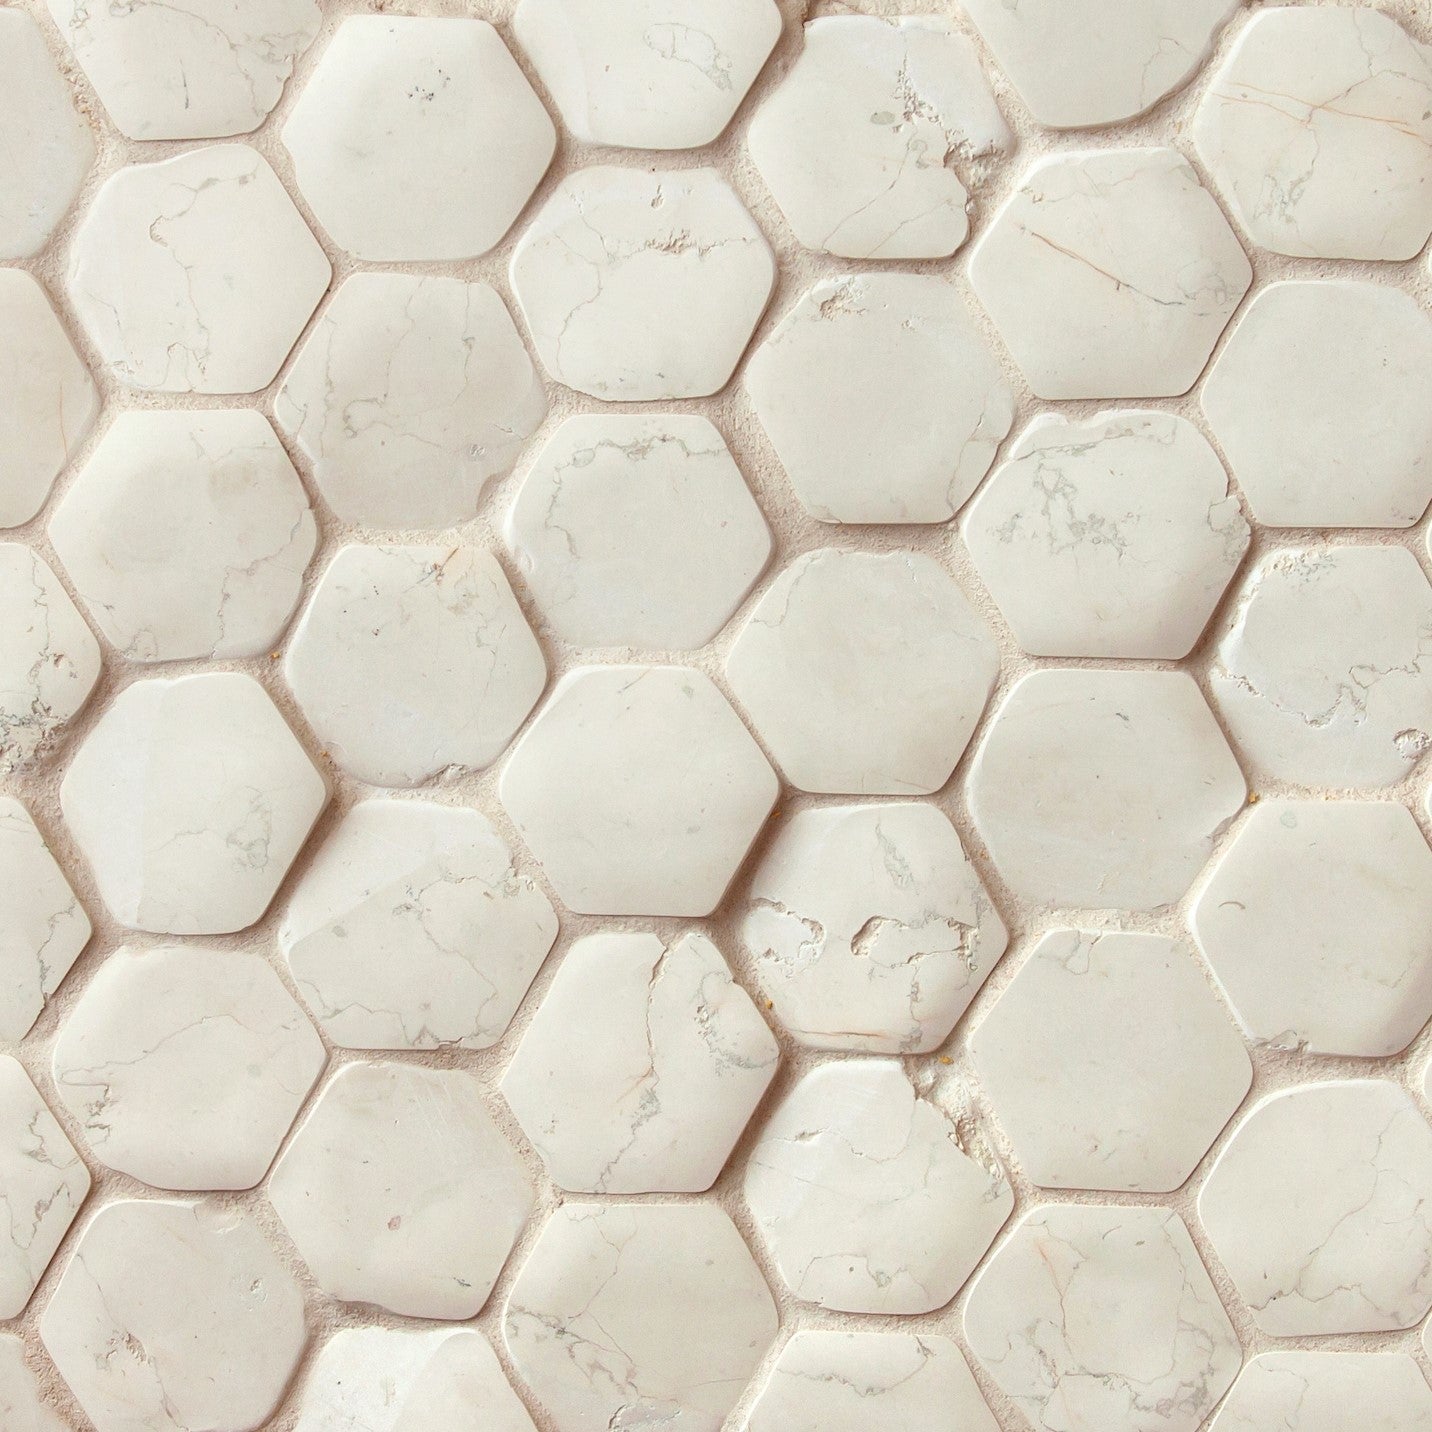 giovanni barbieri timeworn bianco antico natural white marble hexagon pattern mosaic distributed by surface group international